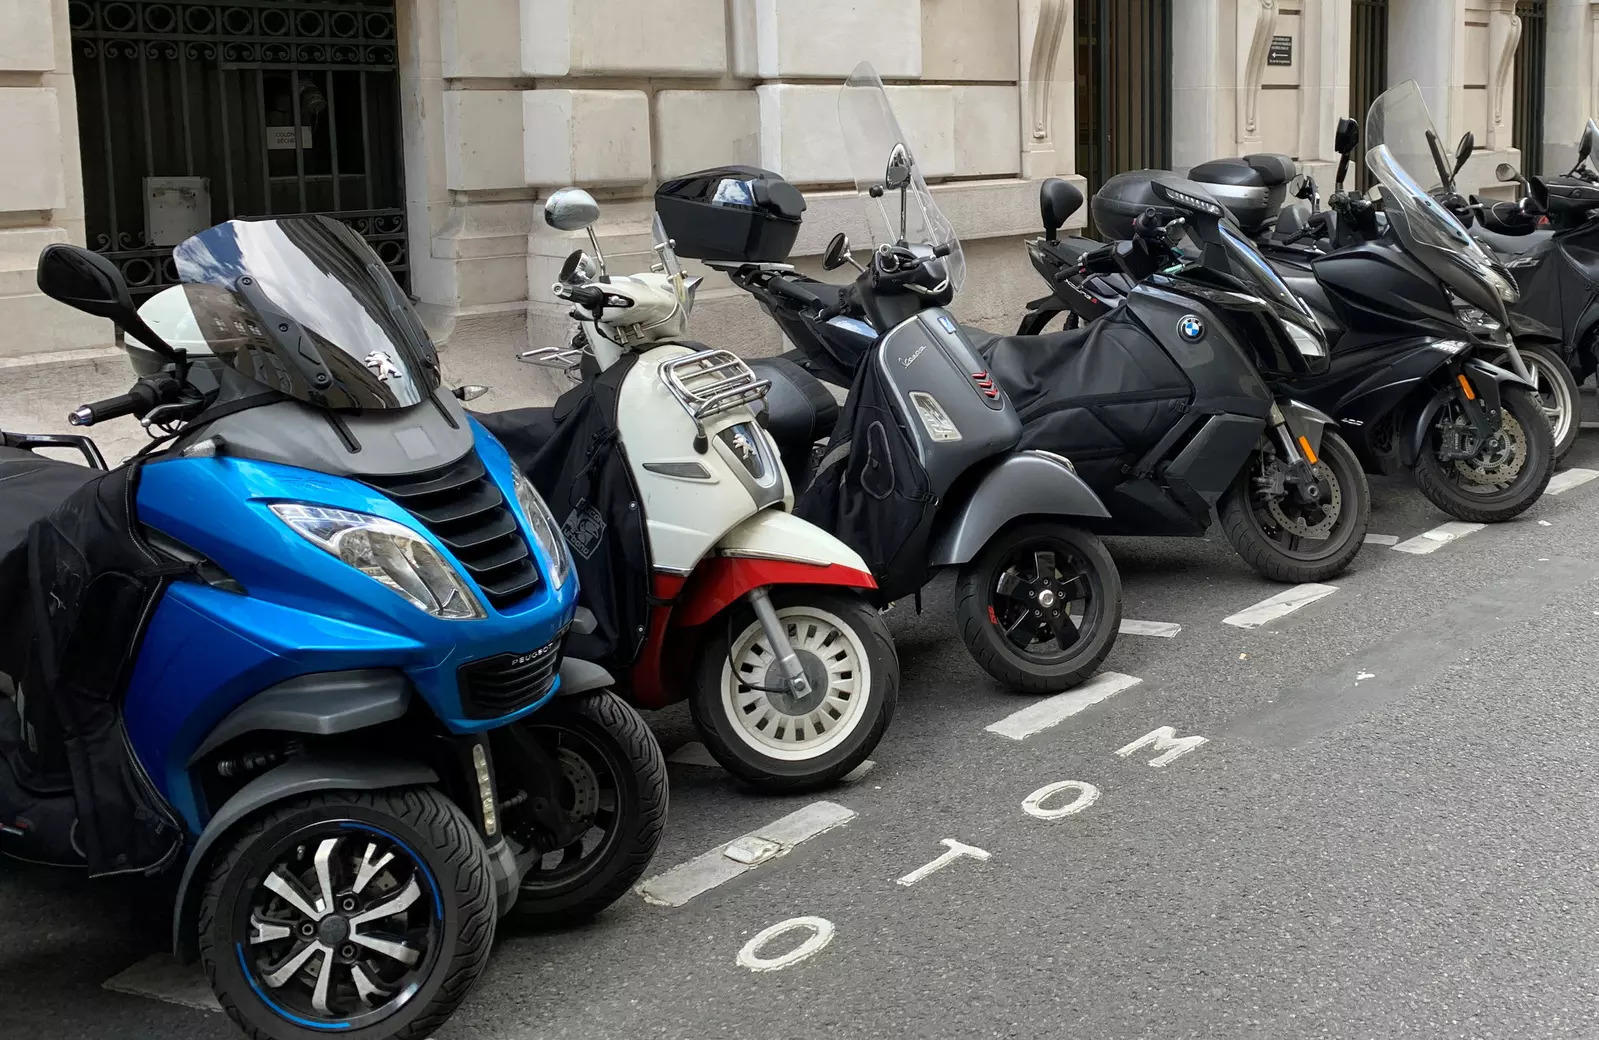  In recent years, mayor Hidalgo has built a network of new bike lanes and increased parking fees for cars in a bid to steer Parisians and commuters towards more environmentally-friendly transport options.